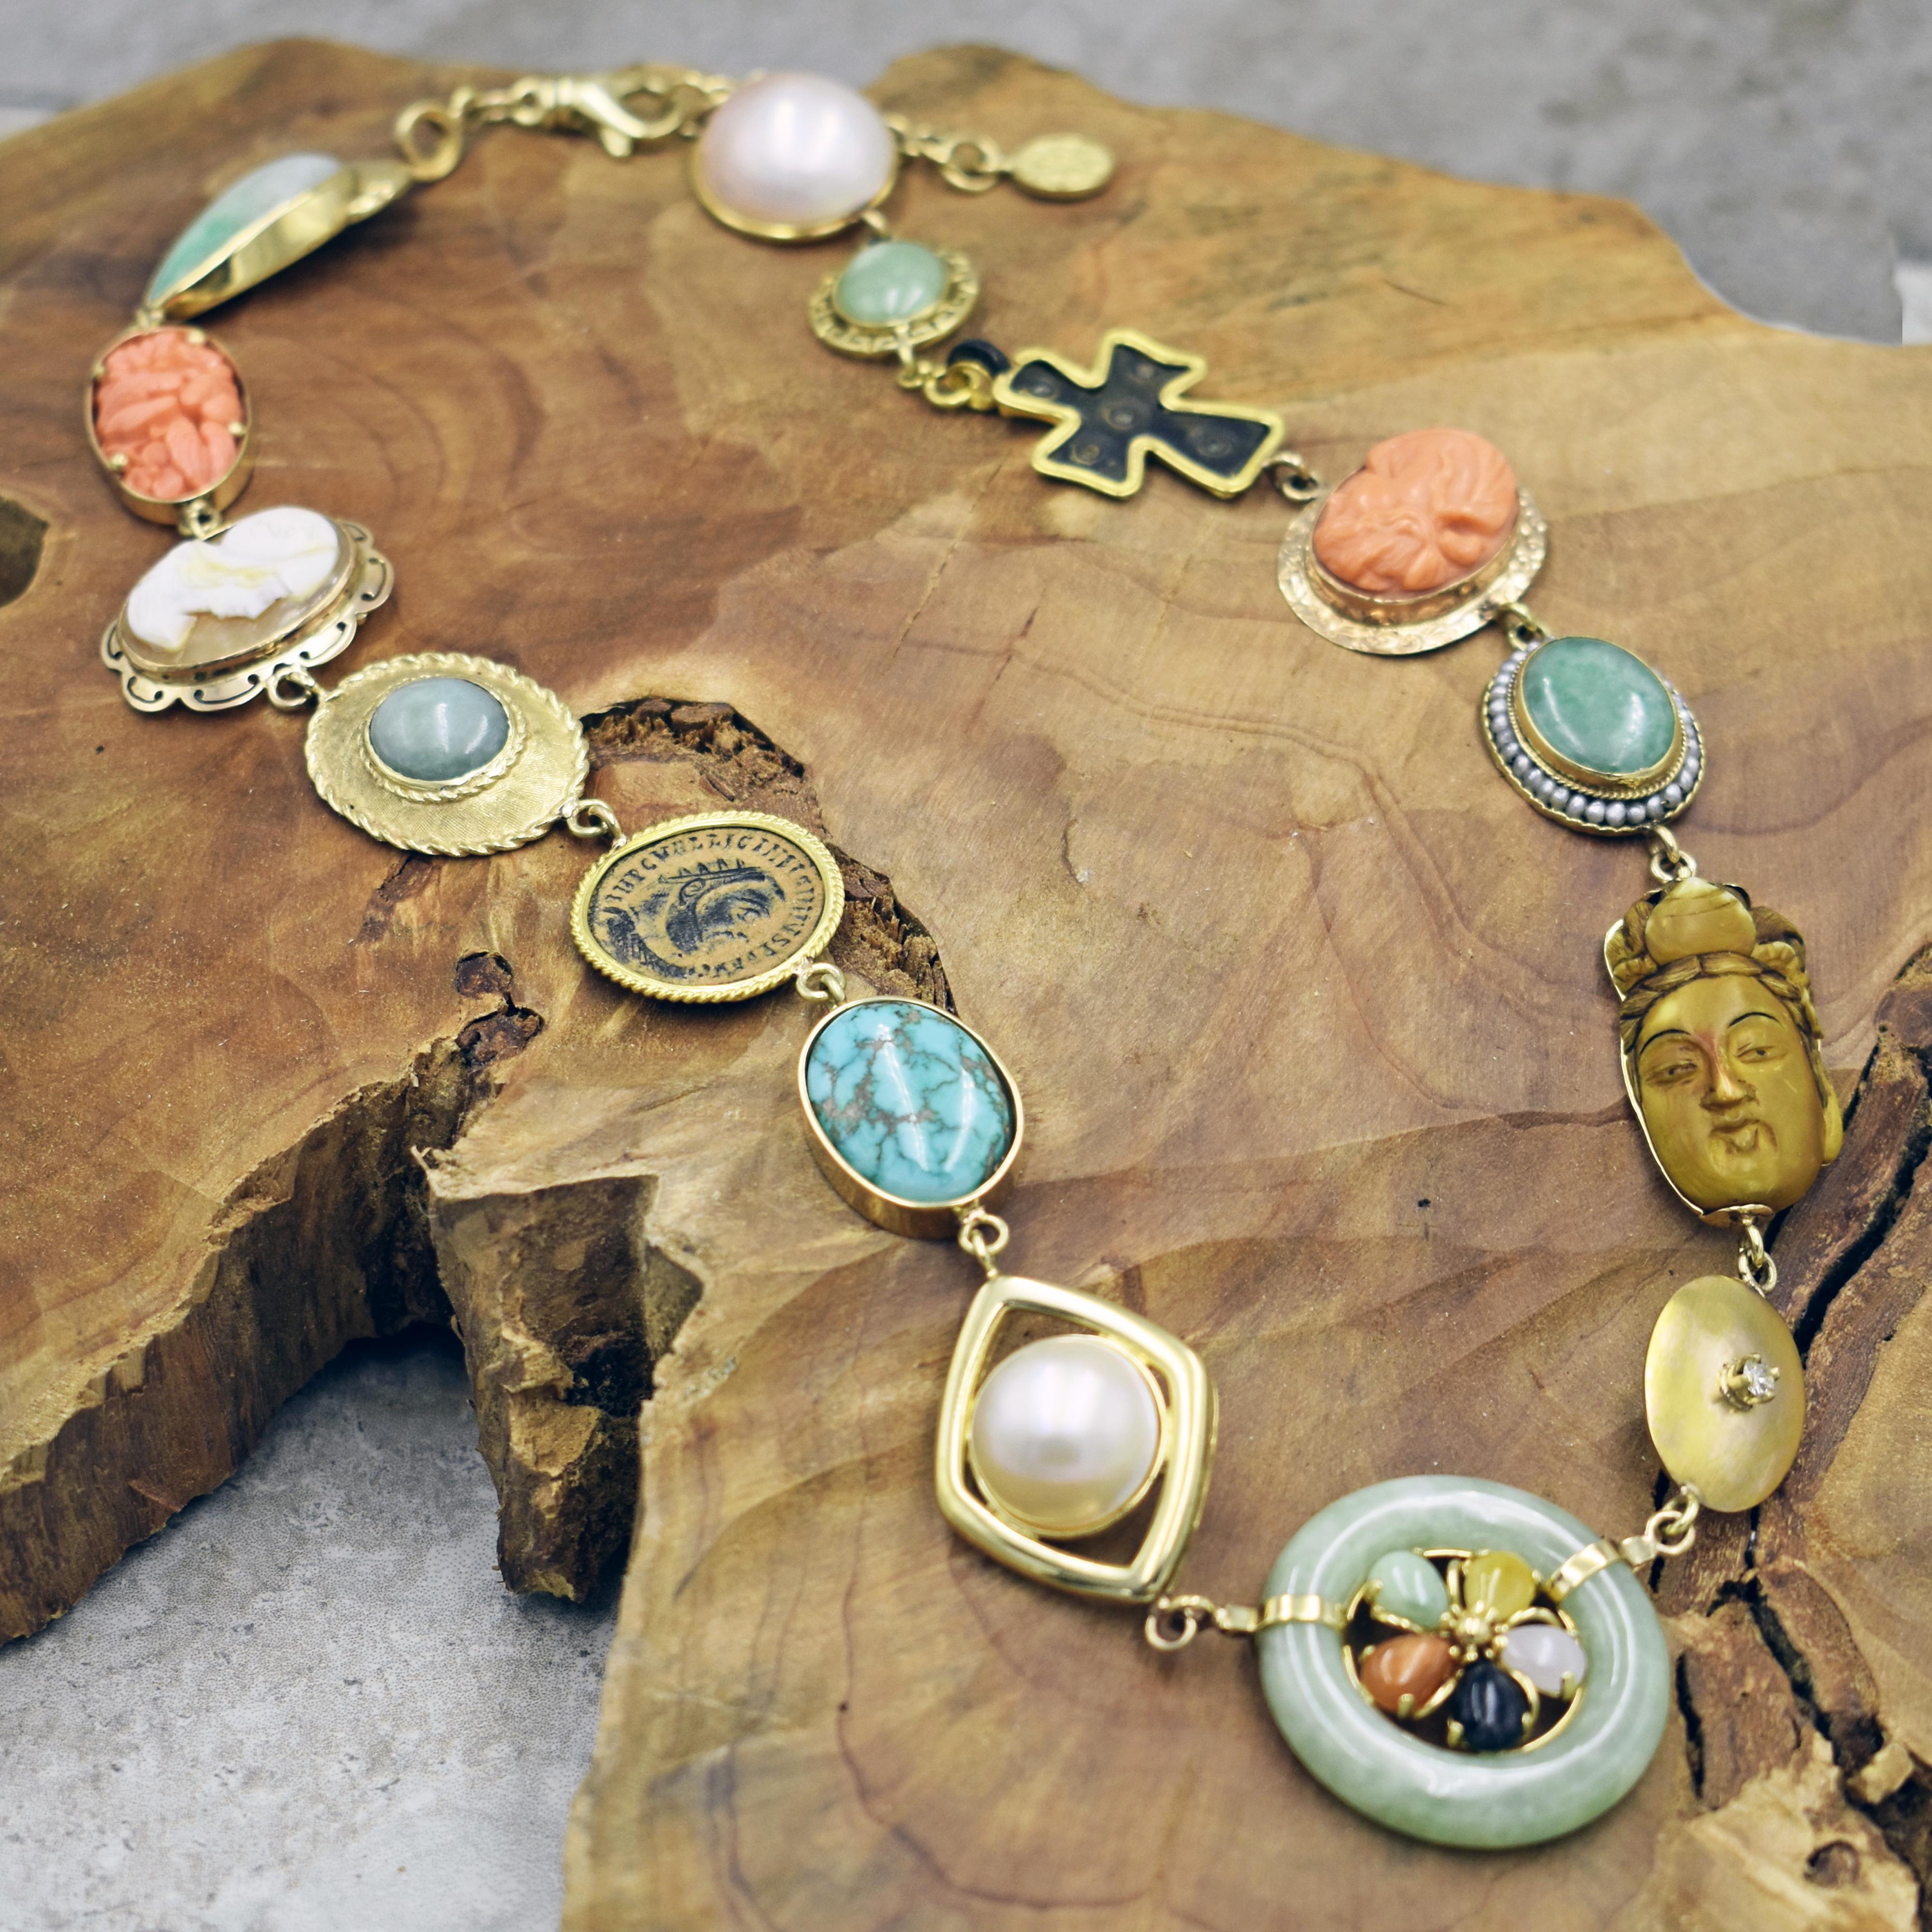 One-of-a-kind Vicki Orr Designs 14k yellow gold Bohemian necklace with a variety of gemstones, vintage, antique and ancient jewelry components.  Necklace has 15 unique pieces, featuring green Jade, carved Coral, Shell Cameo, Ancient Roman Bronze